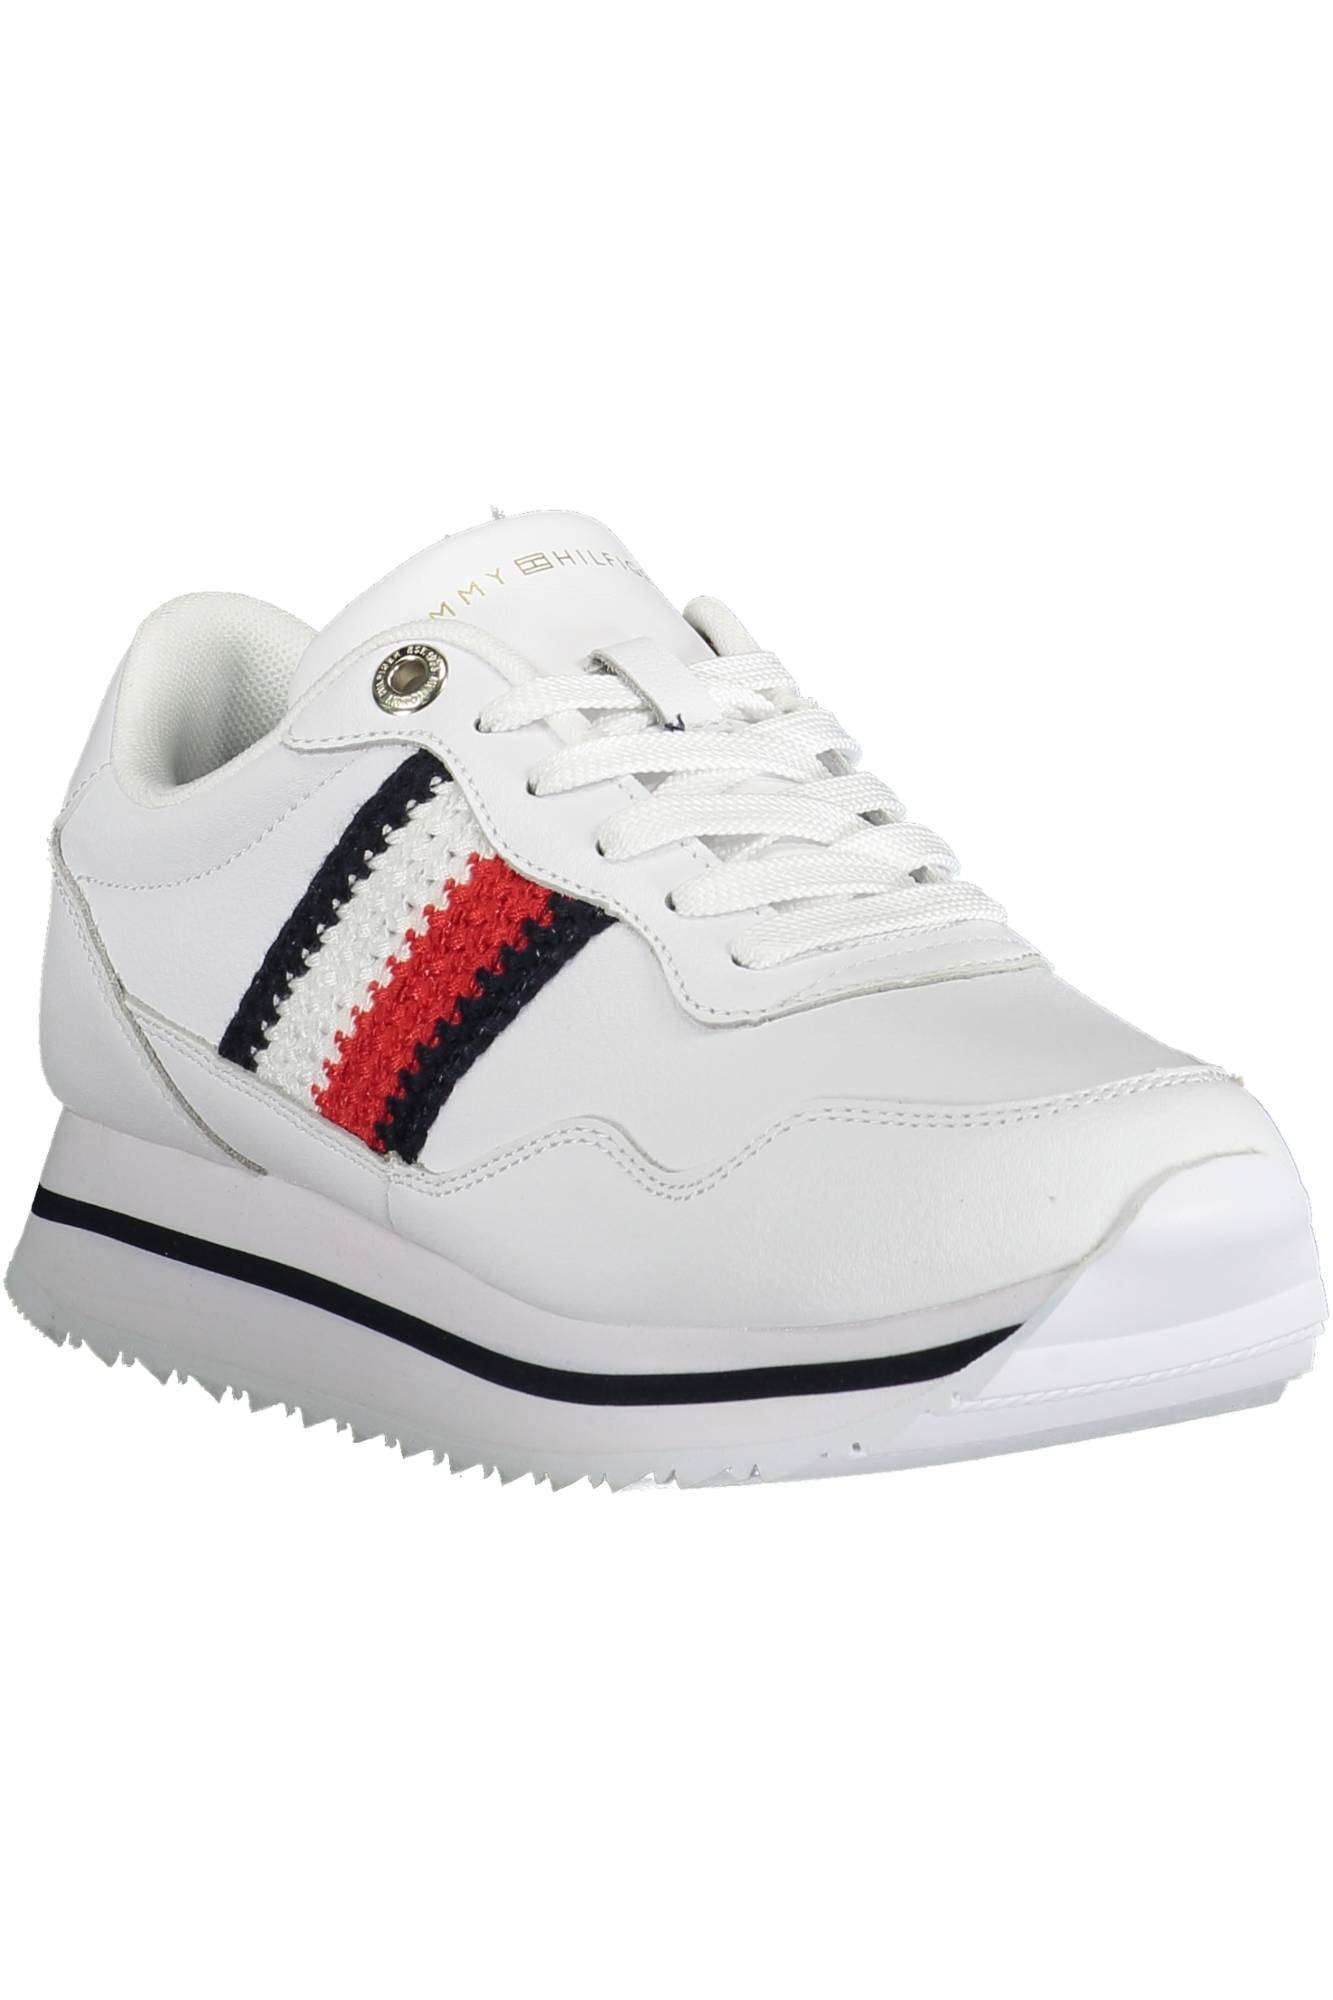 To jump Lure distance scarpe donna TOMMY HILFIGER sneakers bianco in pelle SL050 - ZOOODE.COM